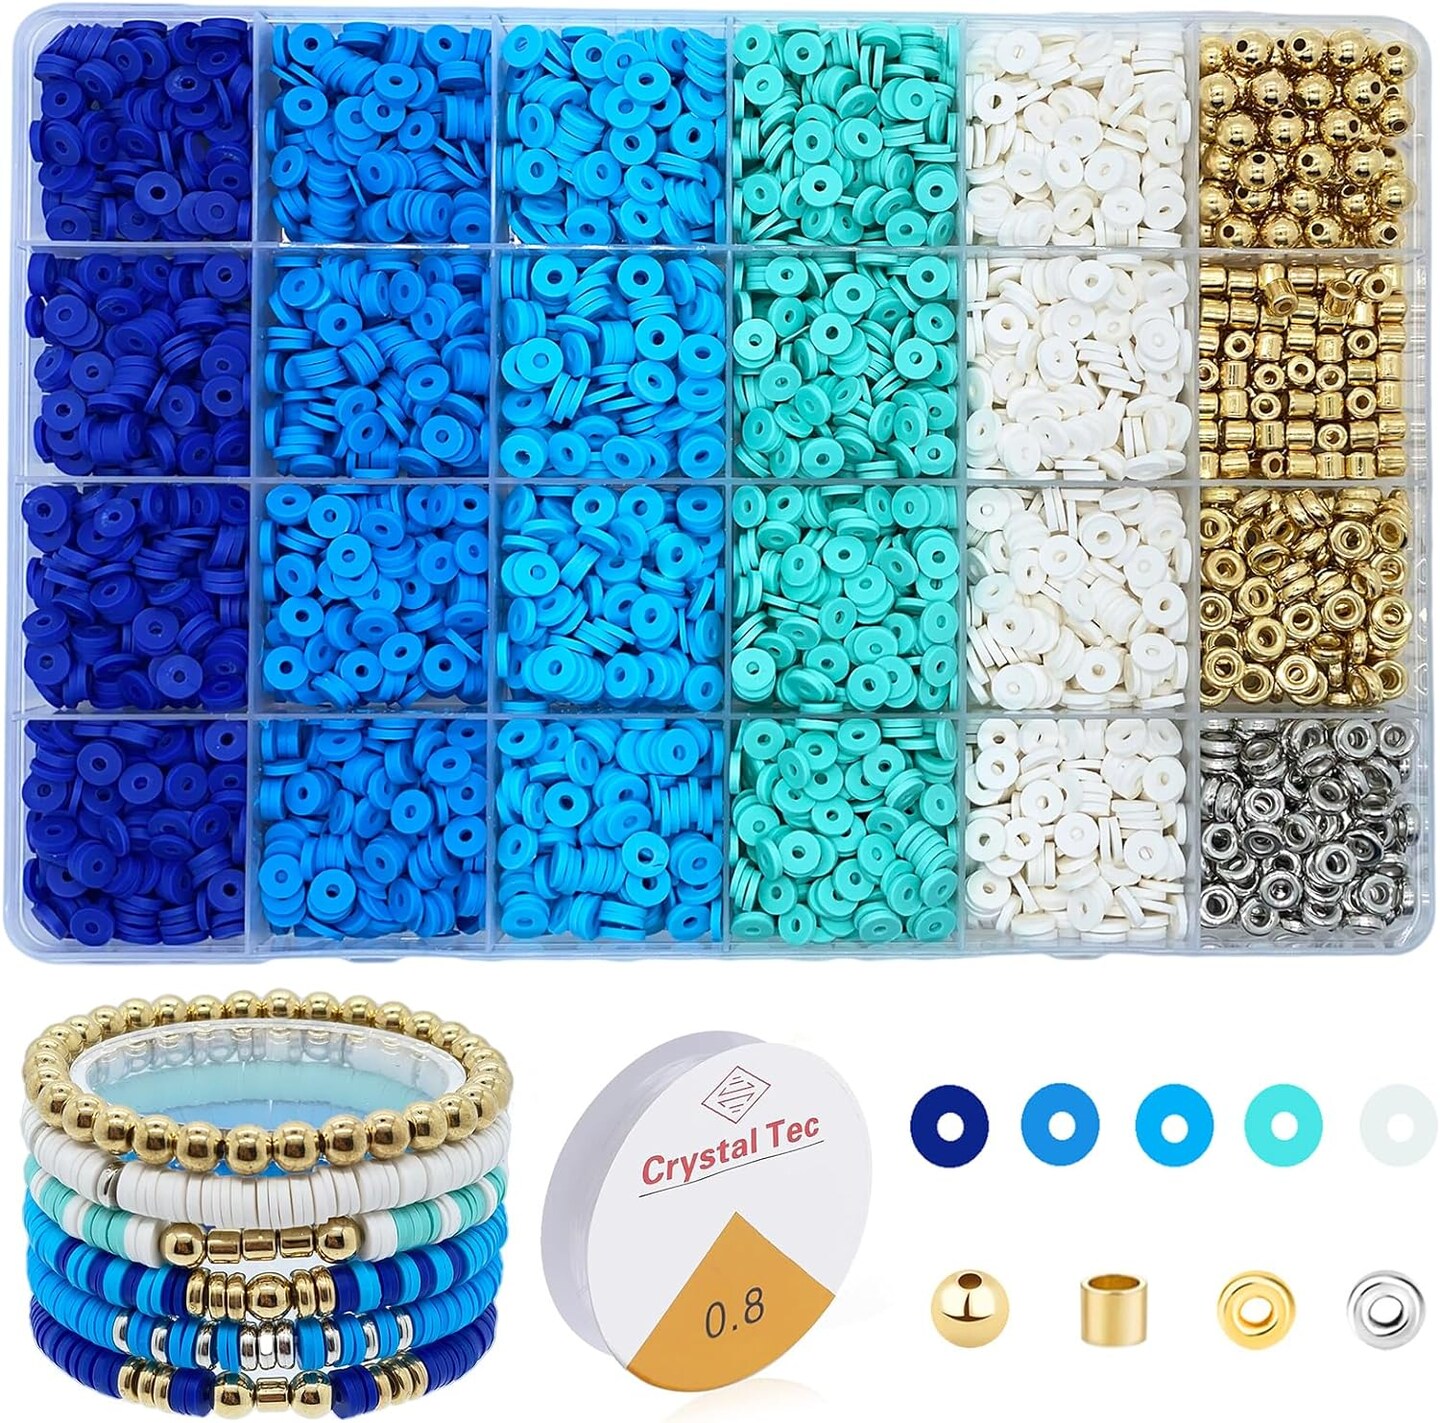 4000pc White Clay Beads 6mm for DIY Jewelry Making Bracelets Necklace Earring, White Bracelet Beads, Heishi Beads, Polymer Clay Beads